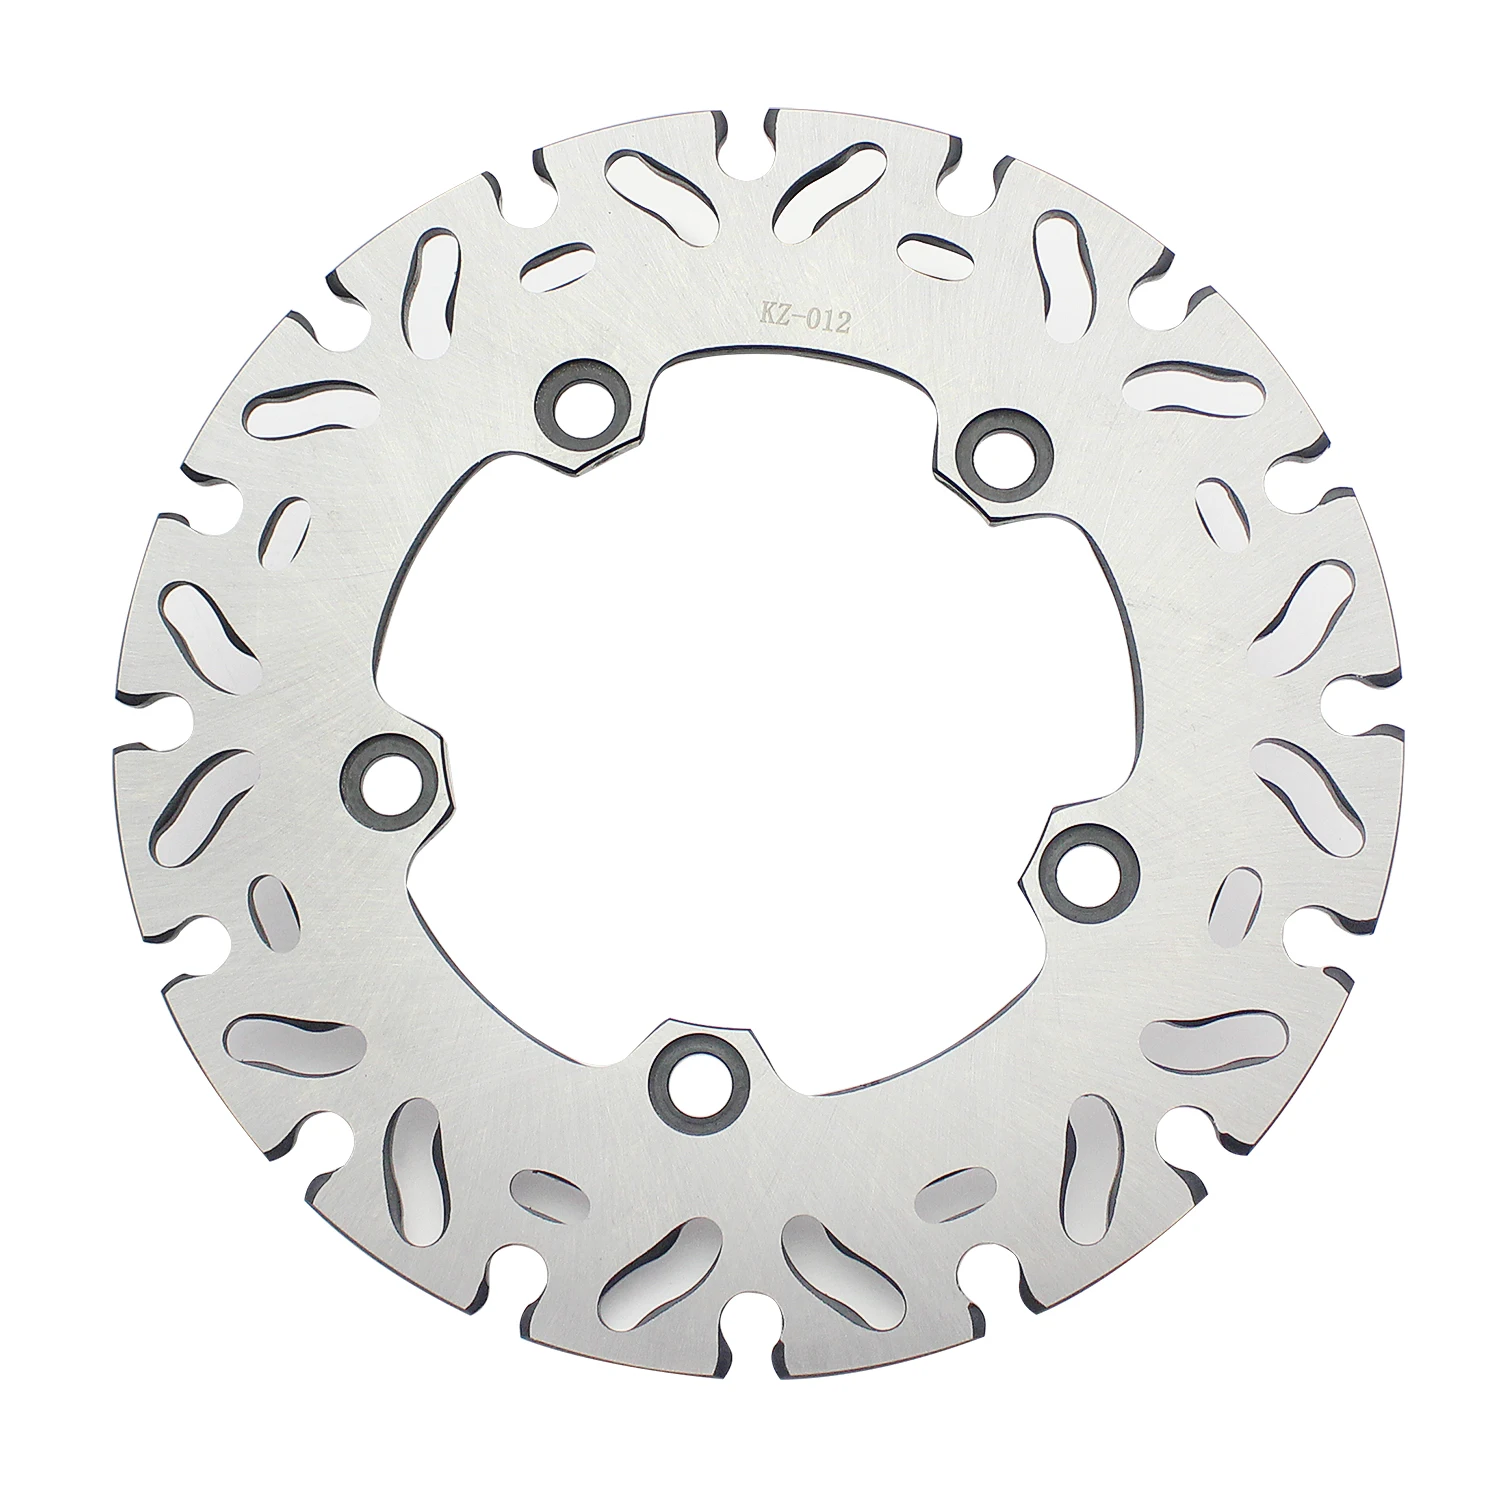 240MM Brake Disk Rotor Rear Brake Disc For YAMAHA YZF-R6 2003-2014 YZF-R1 2004-2012 Motorcycle Stainless Steel Silver